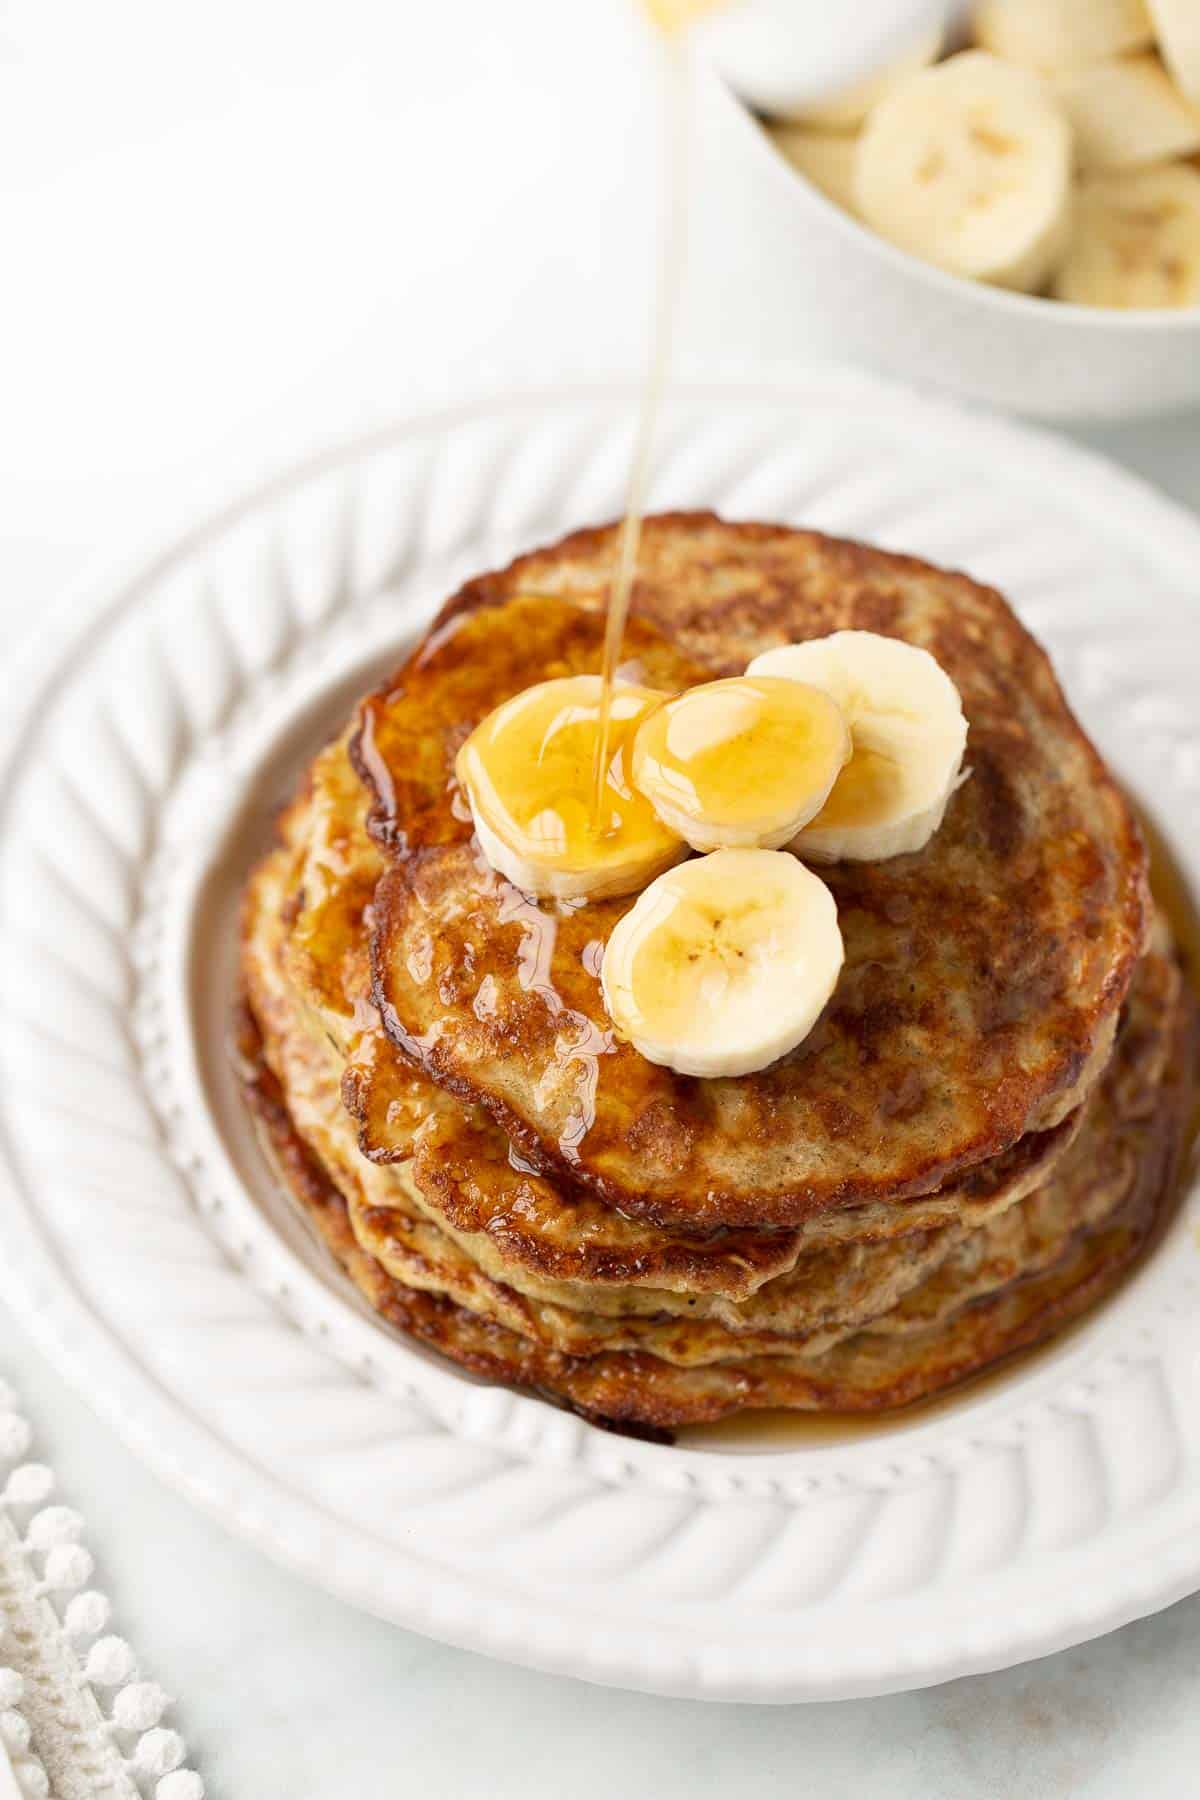 syrup being poured on banana pancakes